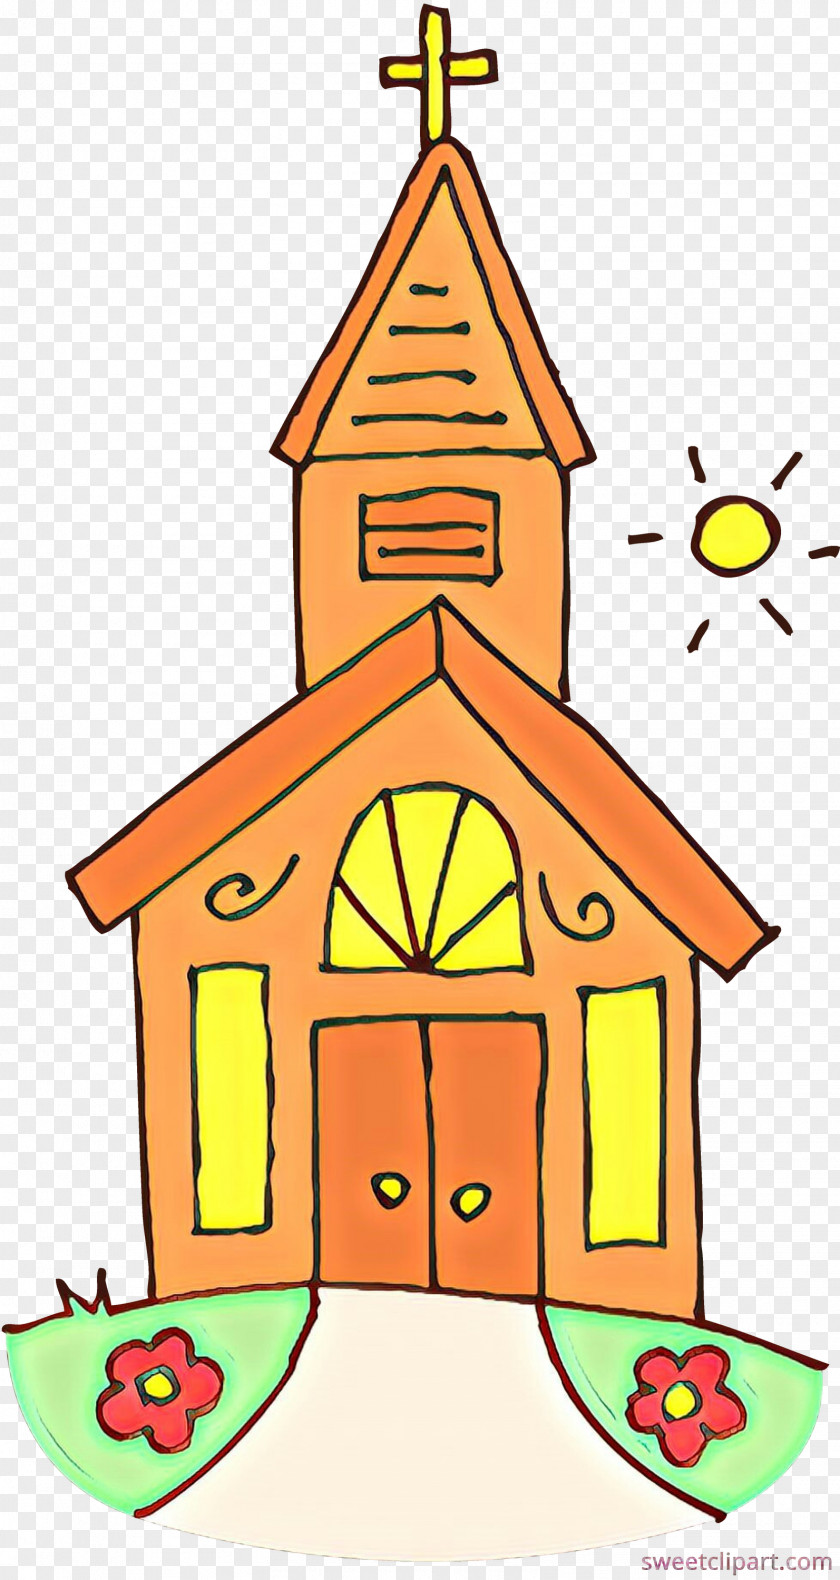 Place Of Worship House Clip Art Steeple Building PNG